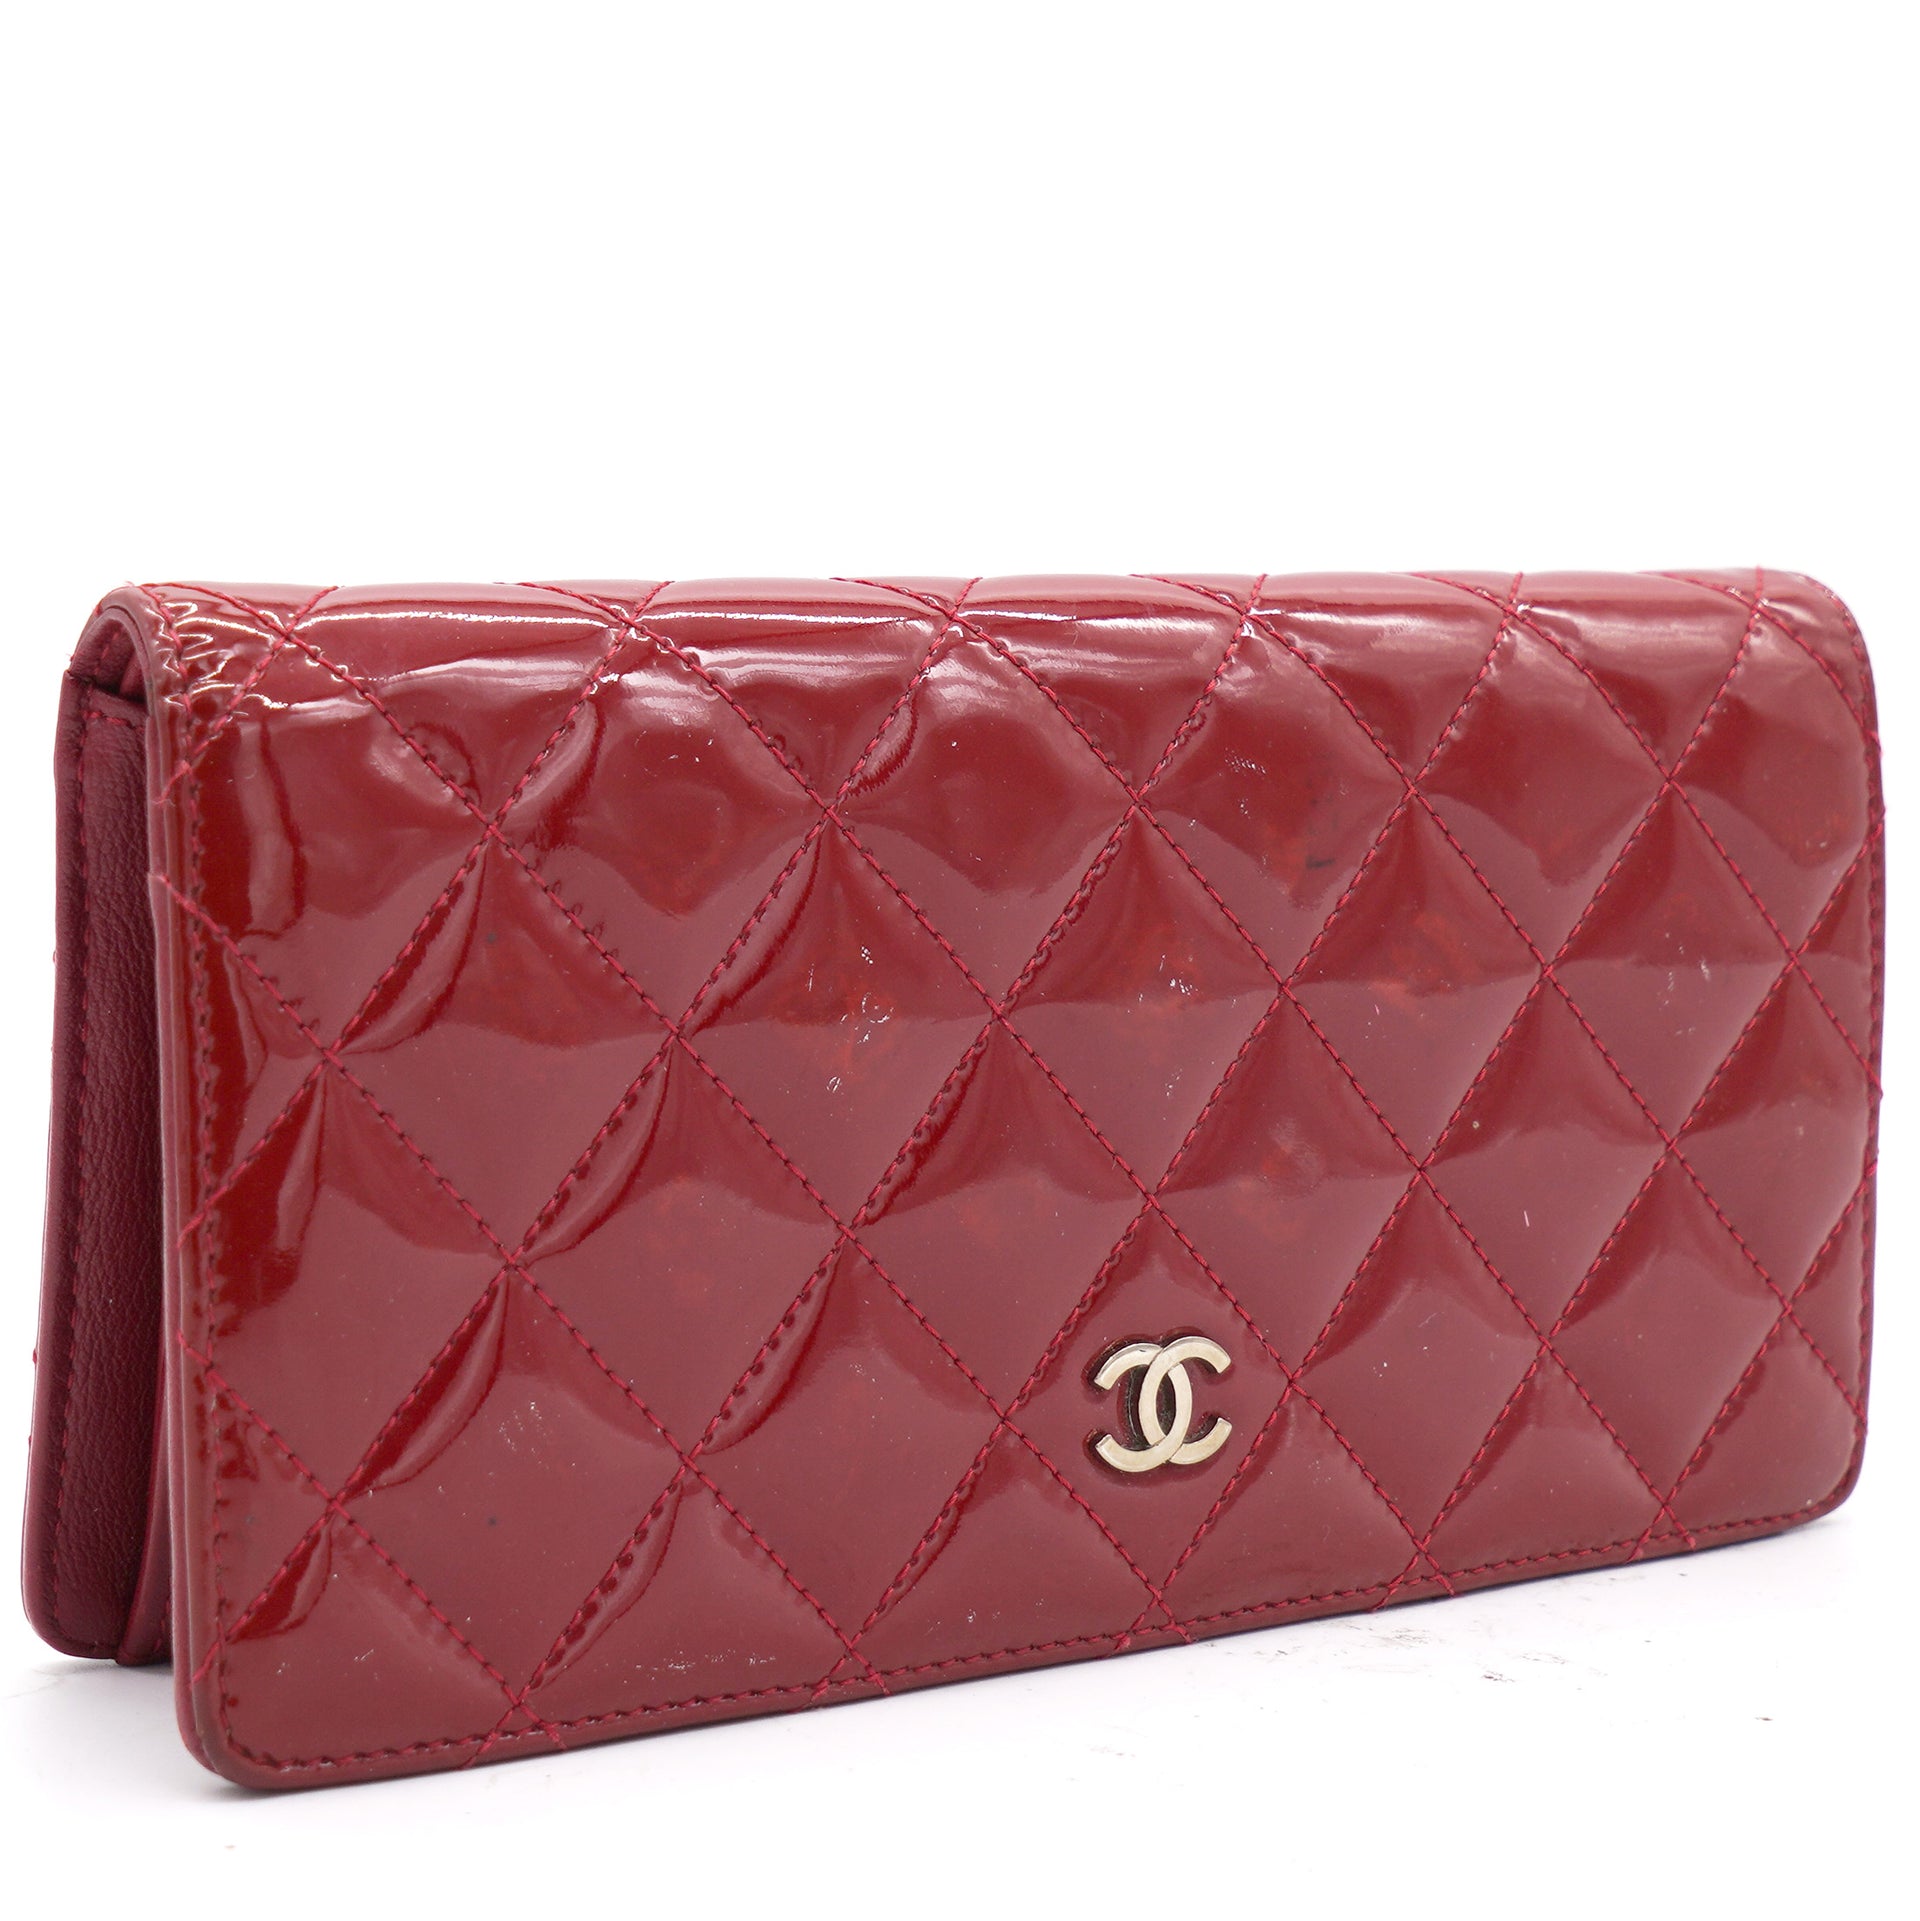 Chanel Classic Flap Wallet REVIEW, 5 Year Wear and Tear